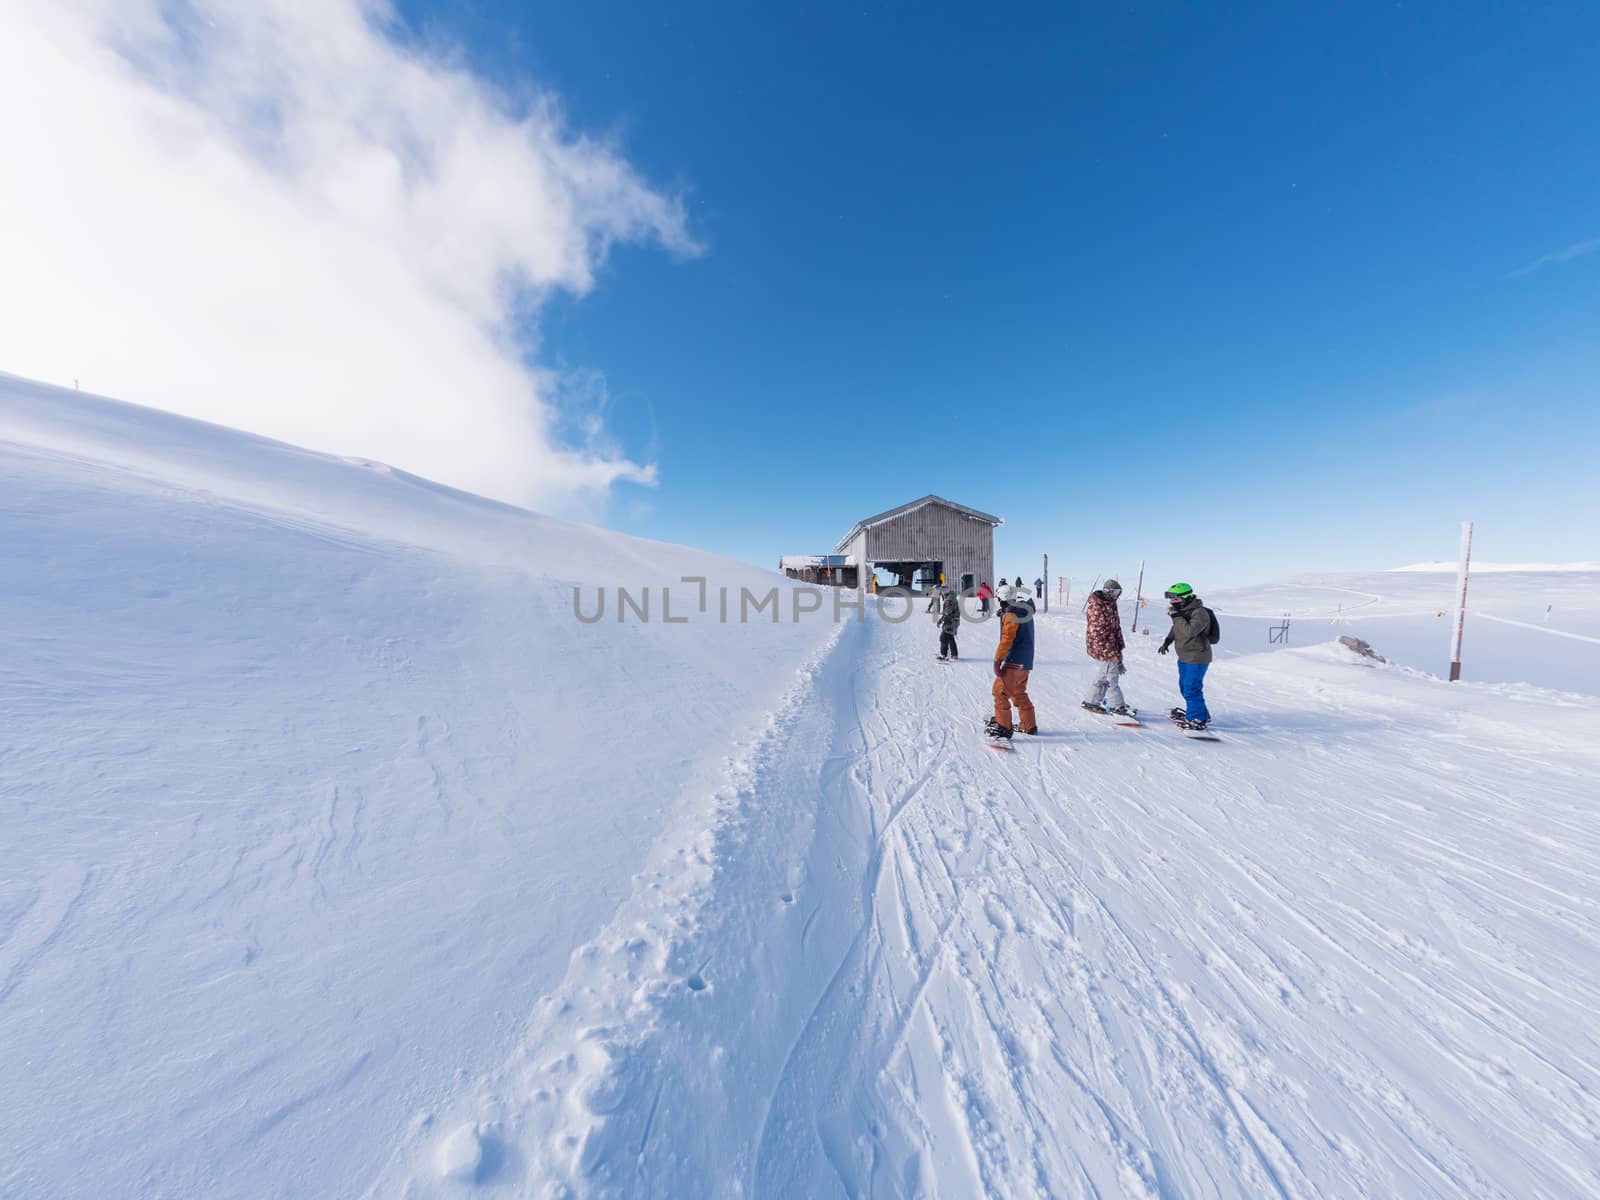 PARNASSOS, GREECE - JANUARY 5, 2019: Parnassos mountain with snow and people on the slopes in a sunny day